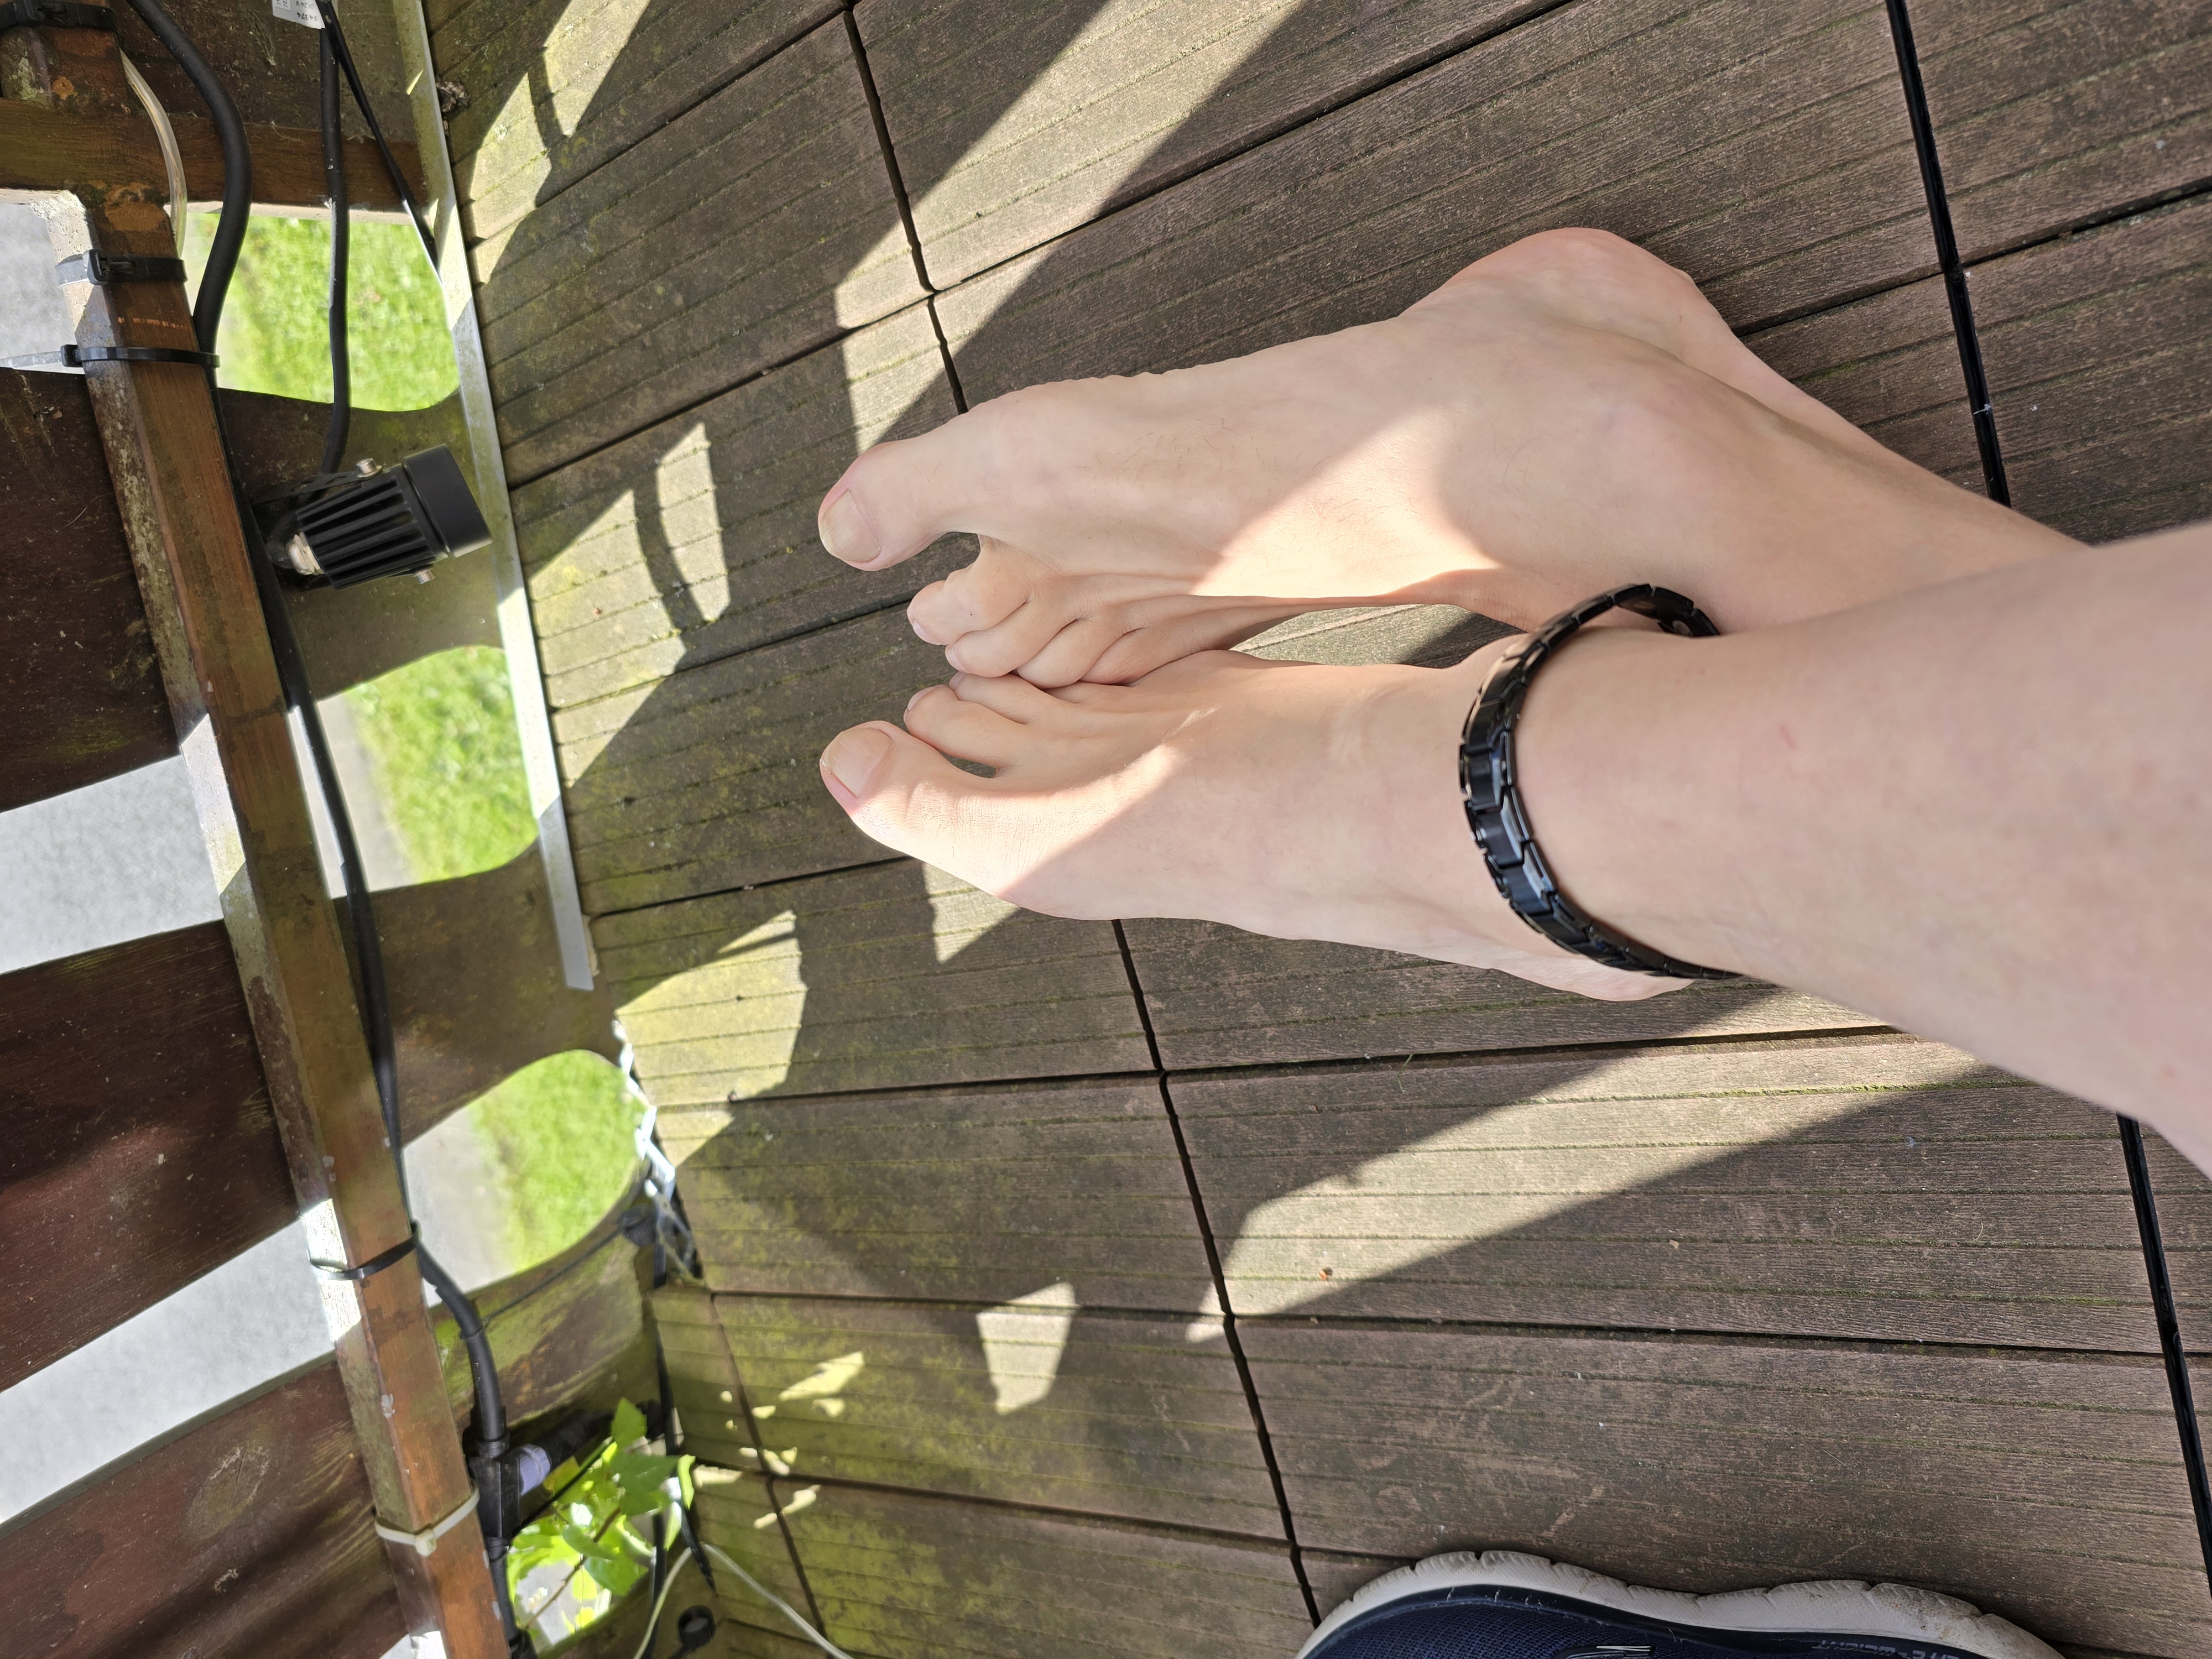 a person's feet on a deck